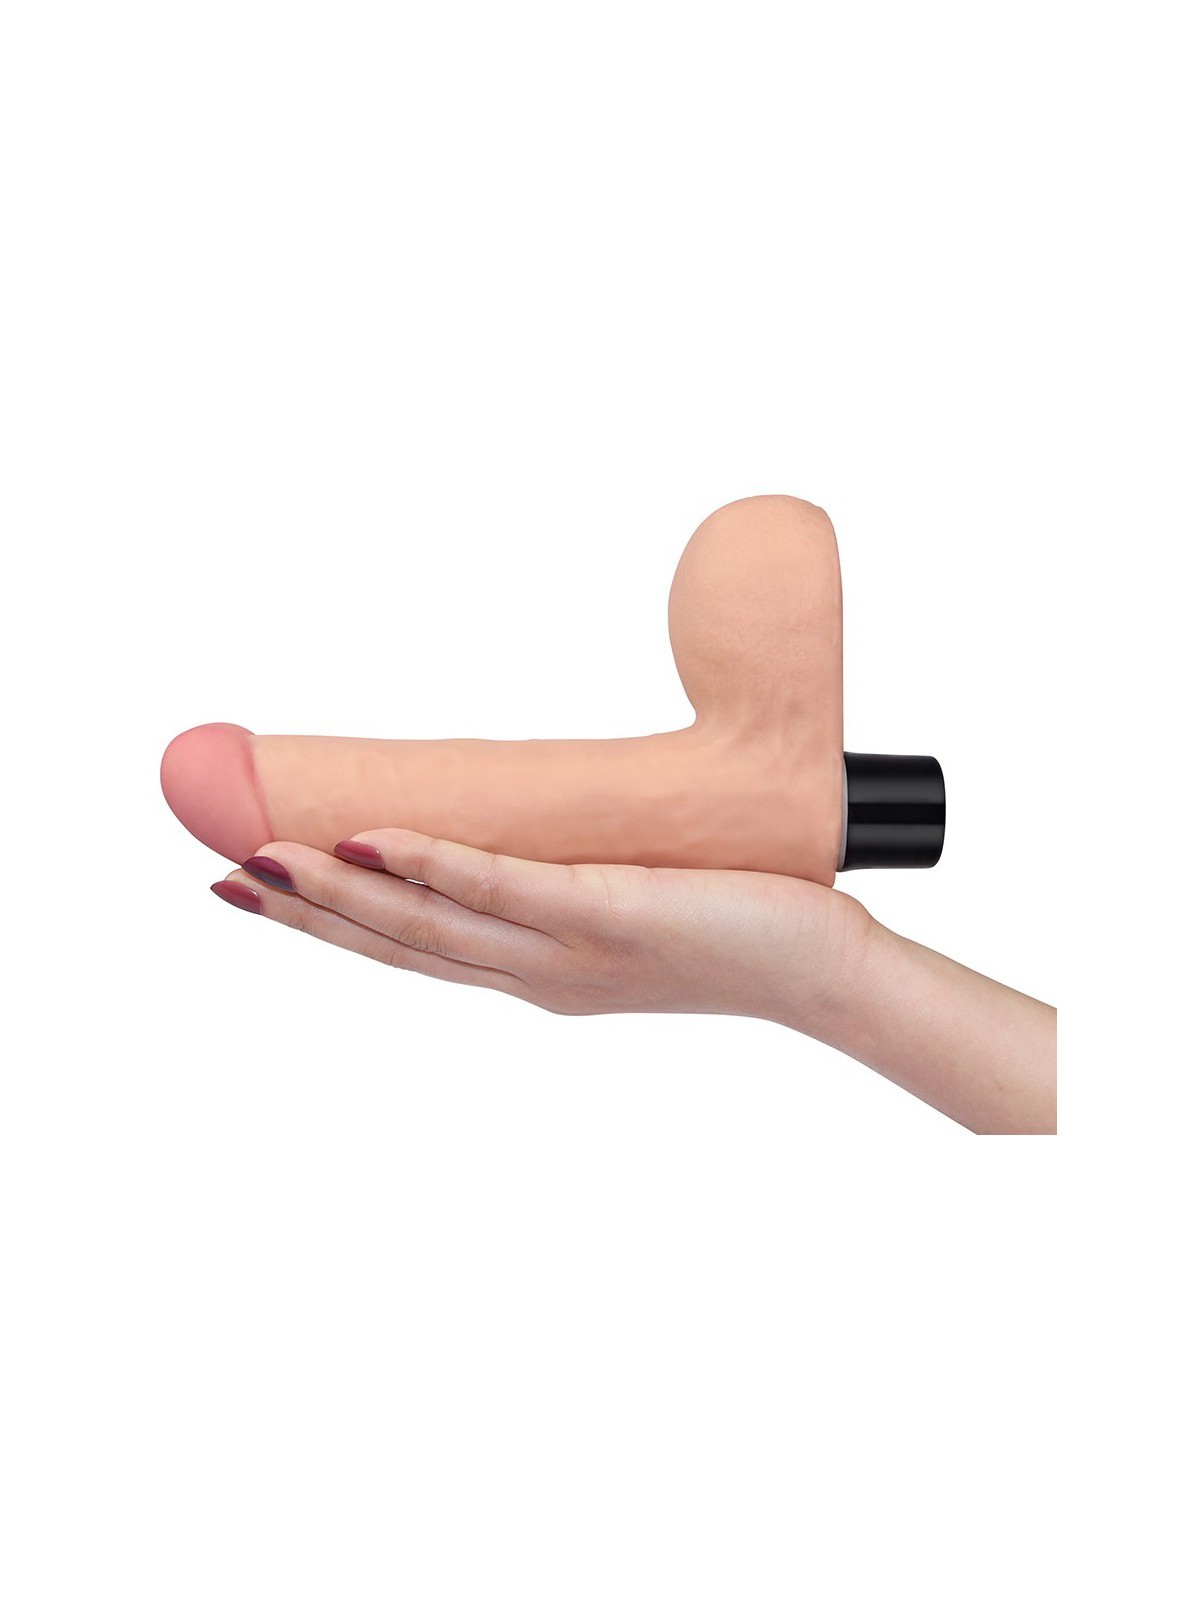 Realistic gods Vibrating God with Real Soft scholarships 14 x 4cm The Real Soft vibrating dildo is here in its version with scho